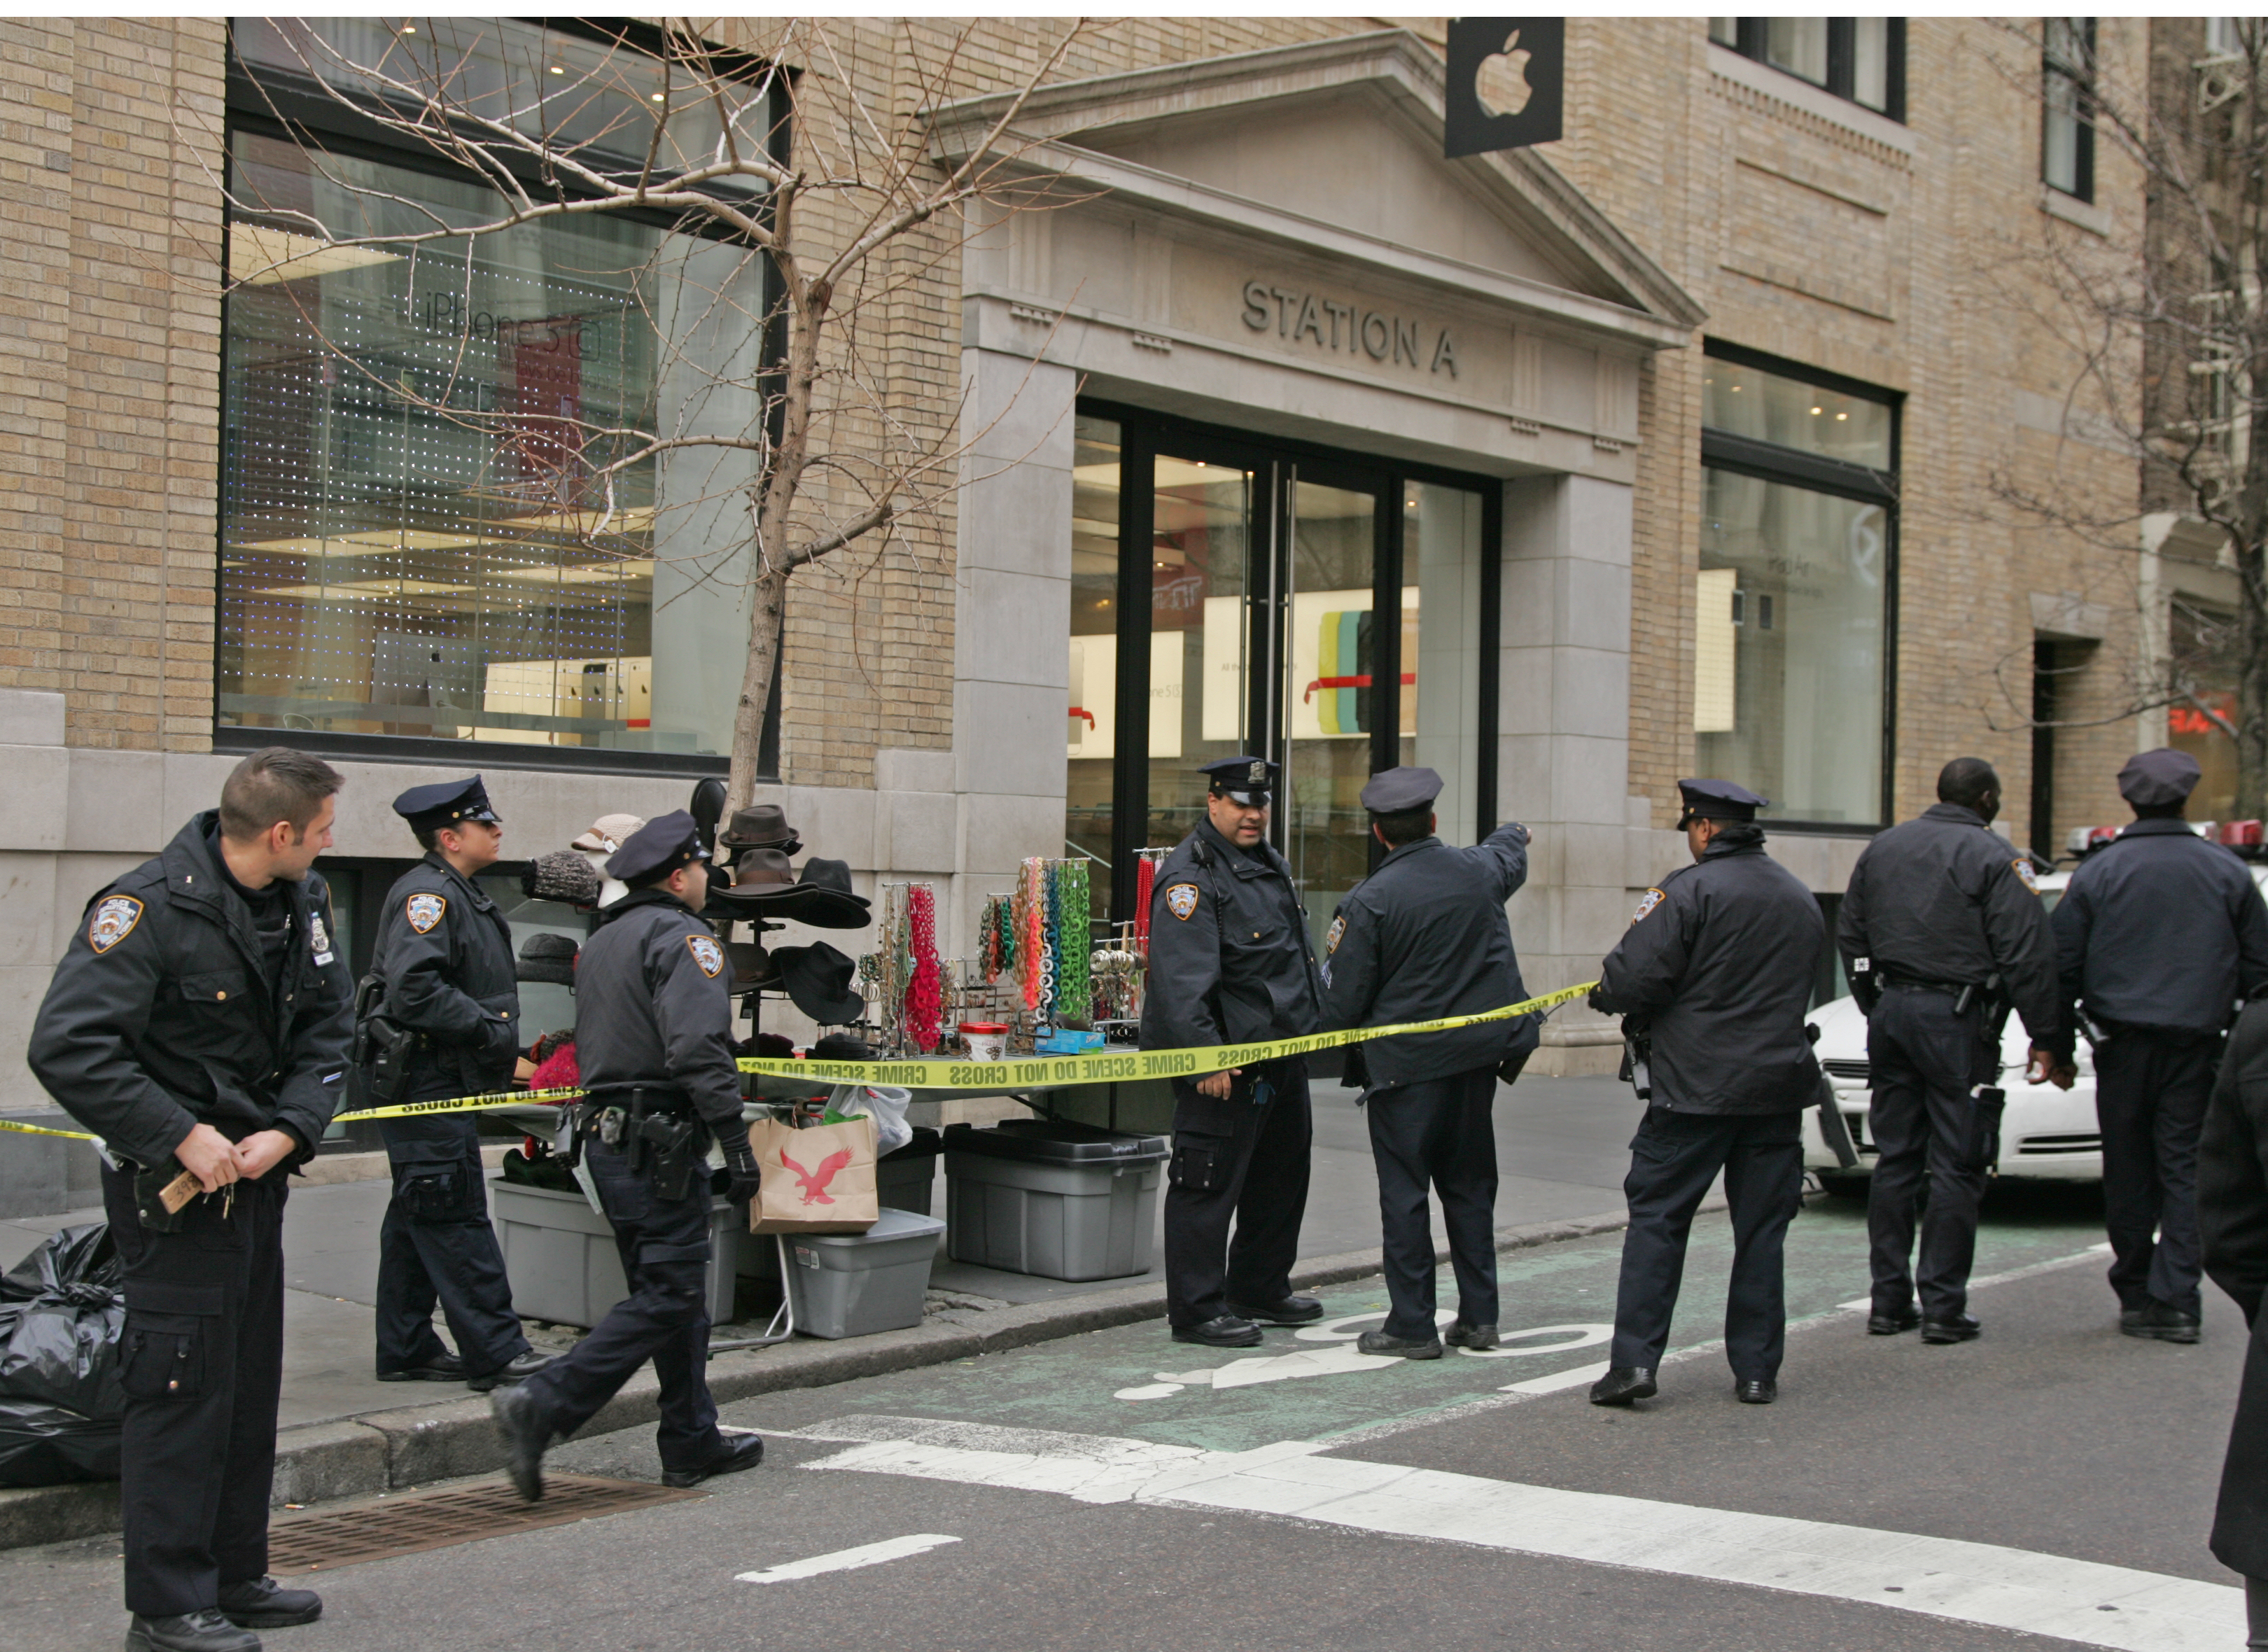 Police cordon off the area in front of the Apple Store on Prince St. around 2:10 p.m. after having cleared the sidewalk.  Photos by Sam Spokony